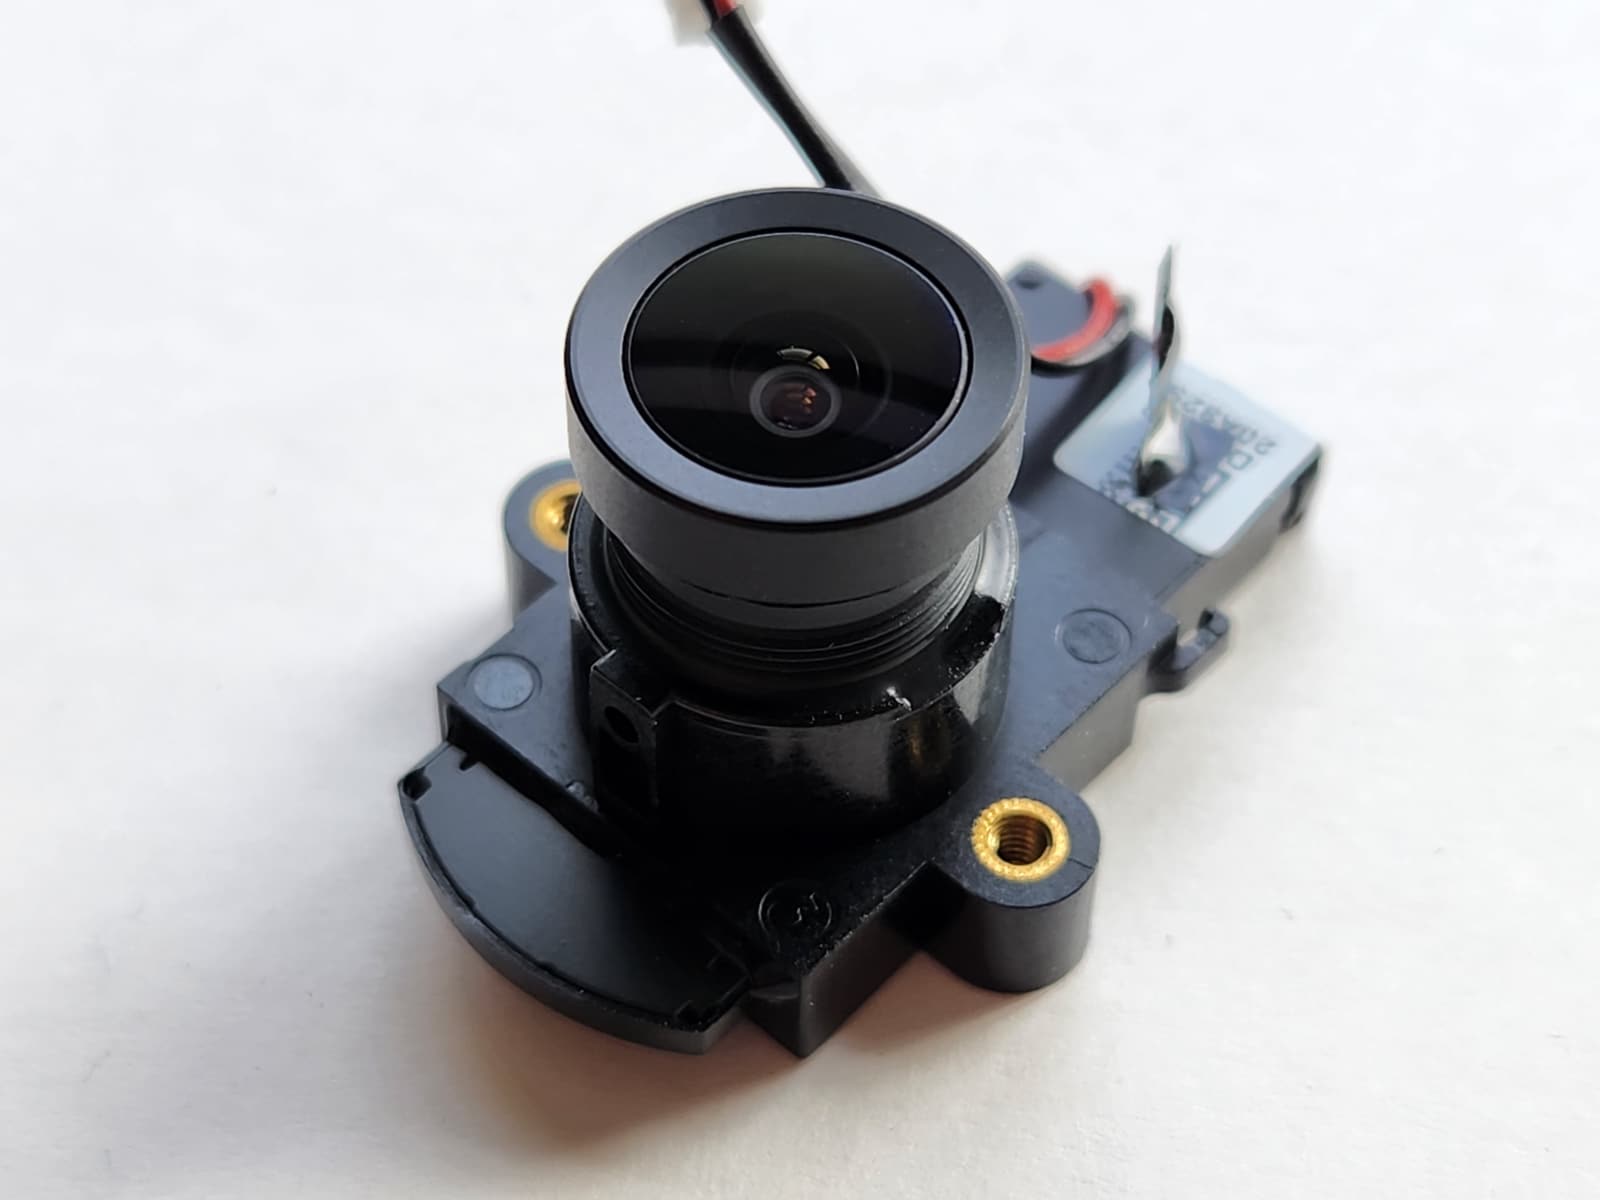 A matte black camera lens, about the size of the end of a pinky finger